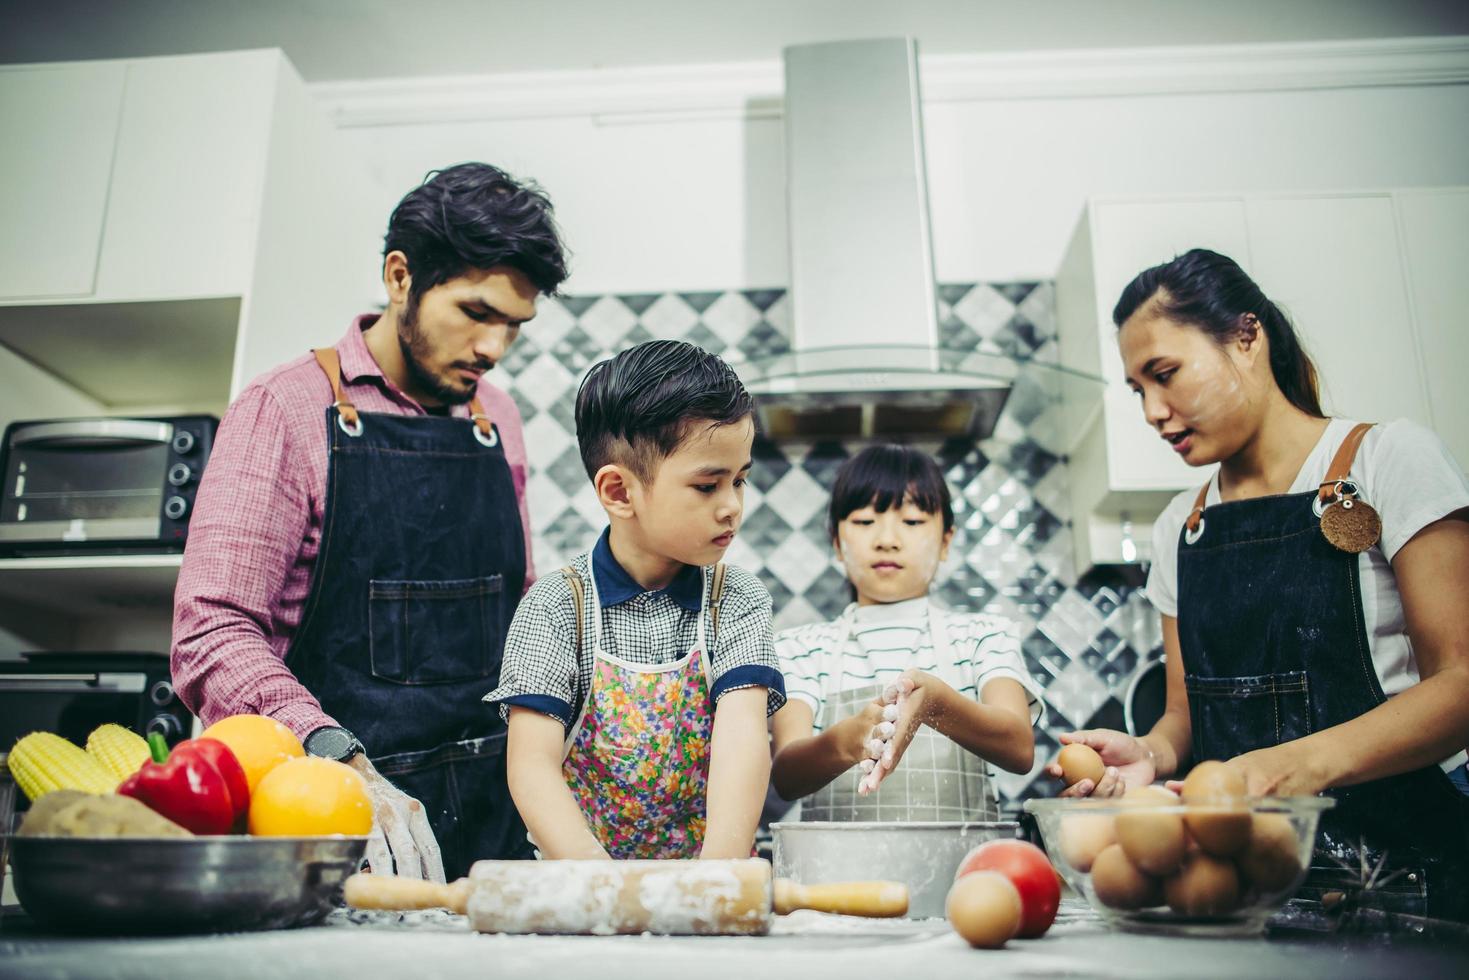 Happy family enjoying their time cooking together in the kitchen photo